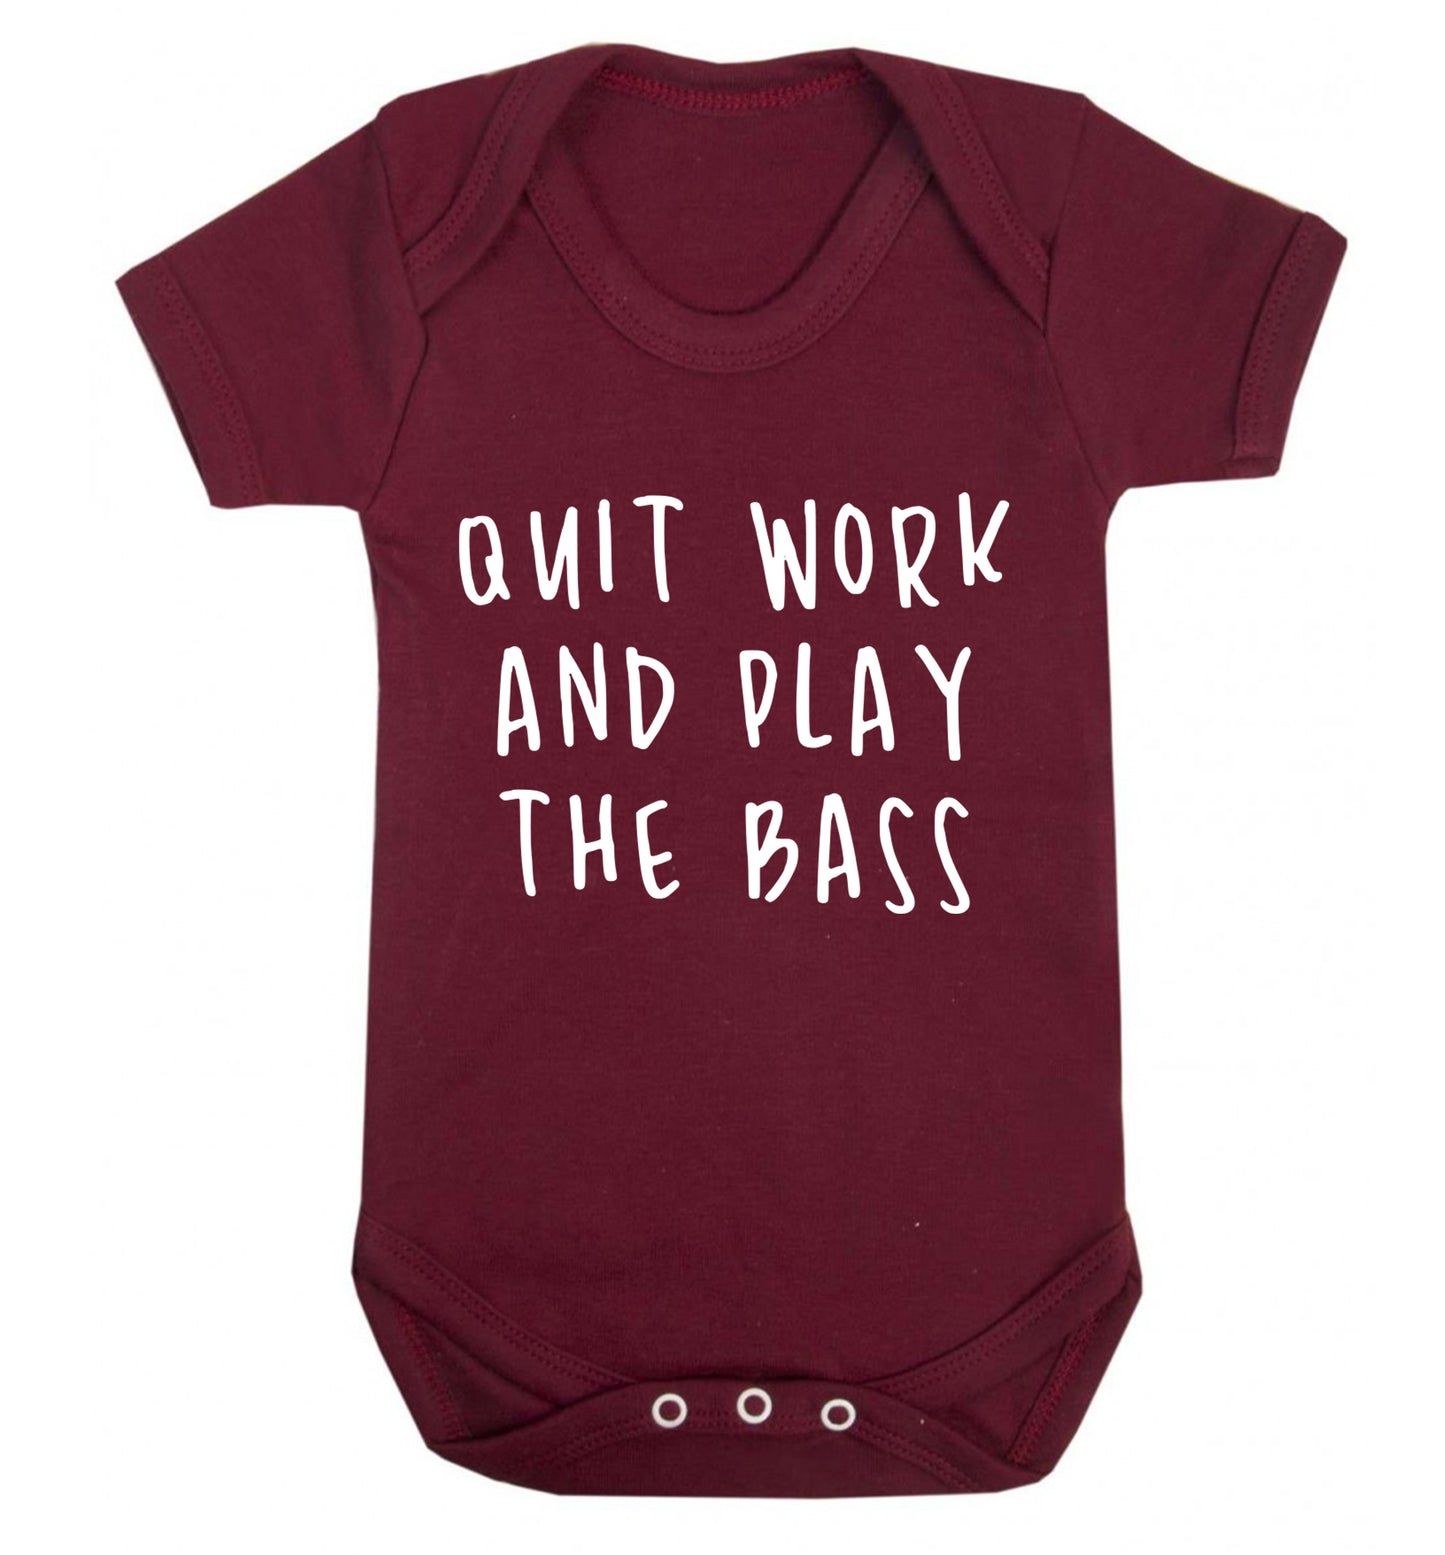 Quit work and play the bass Baby Vest maroon 18-24 months